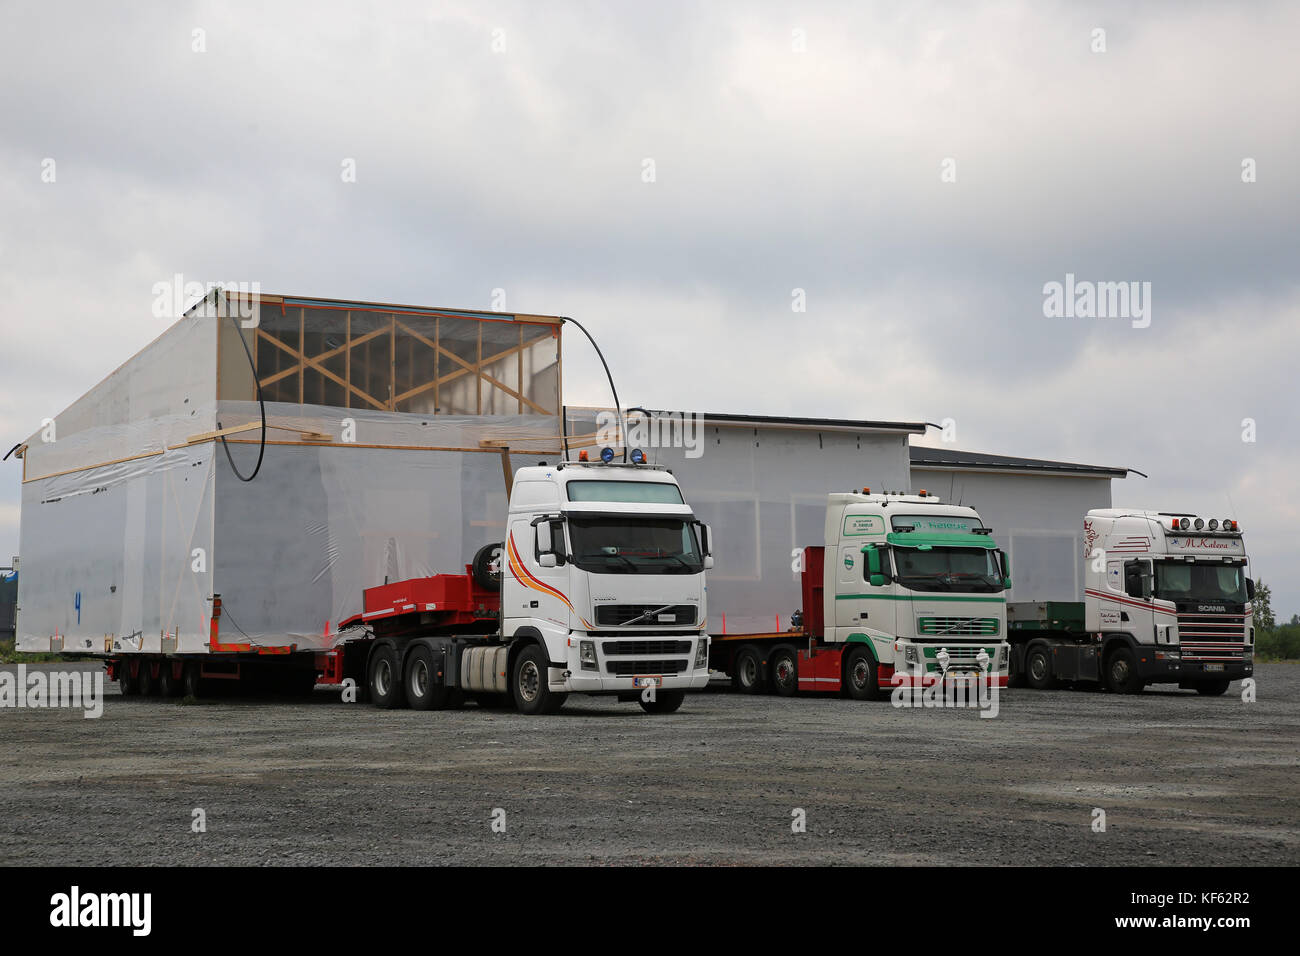 FORSSA, FINLAND - AUGUST 10, 2017: Three oversize load transports of prefabricated house modules, hauled by M. Kaleva semi trailer trucks, parked on a Stock Photo